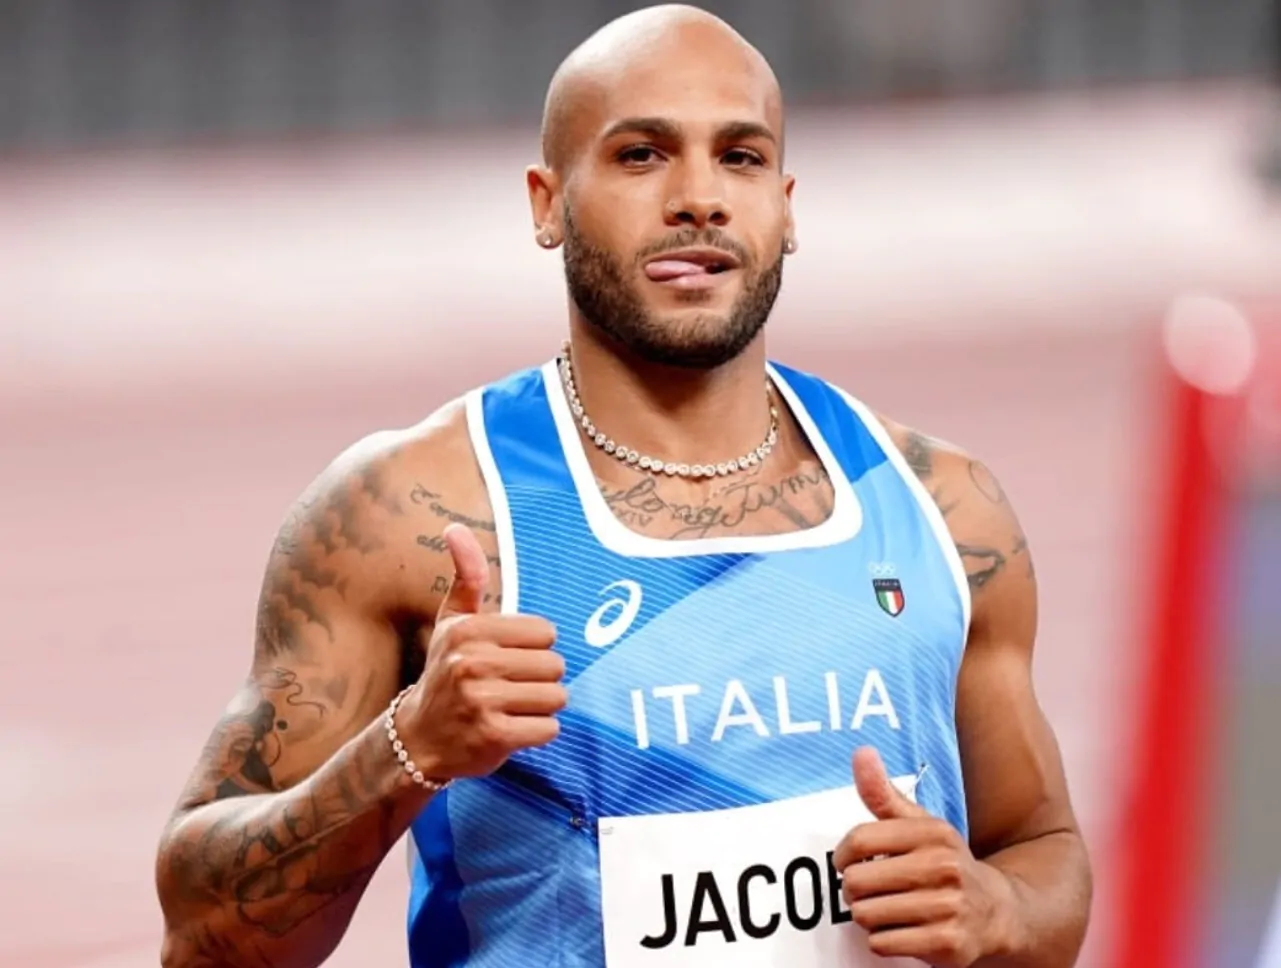 Marcell Jacobs vince l’oro